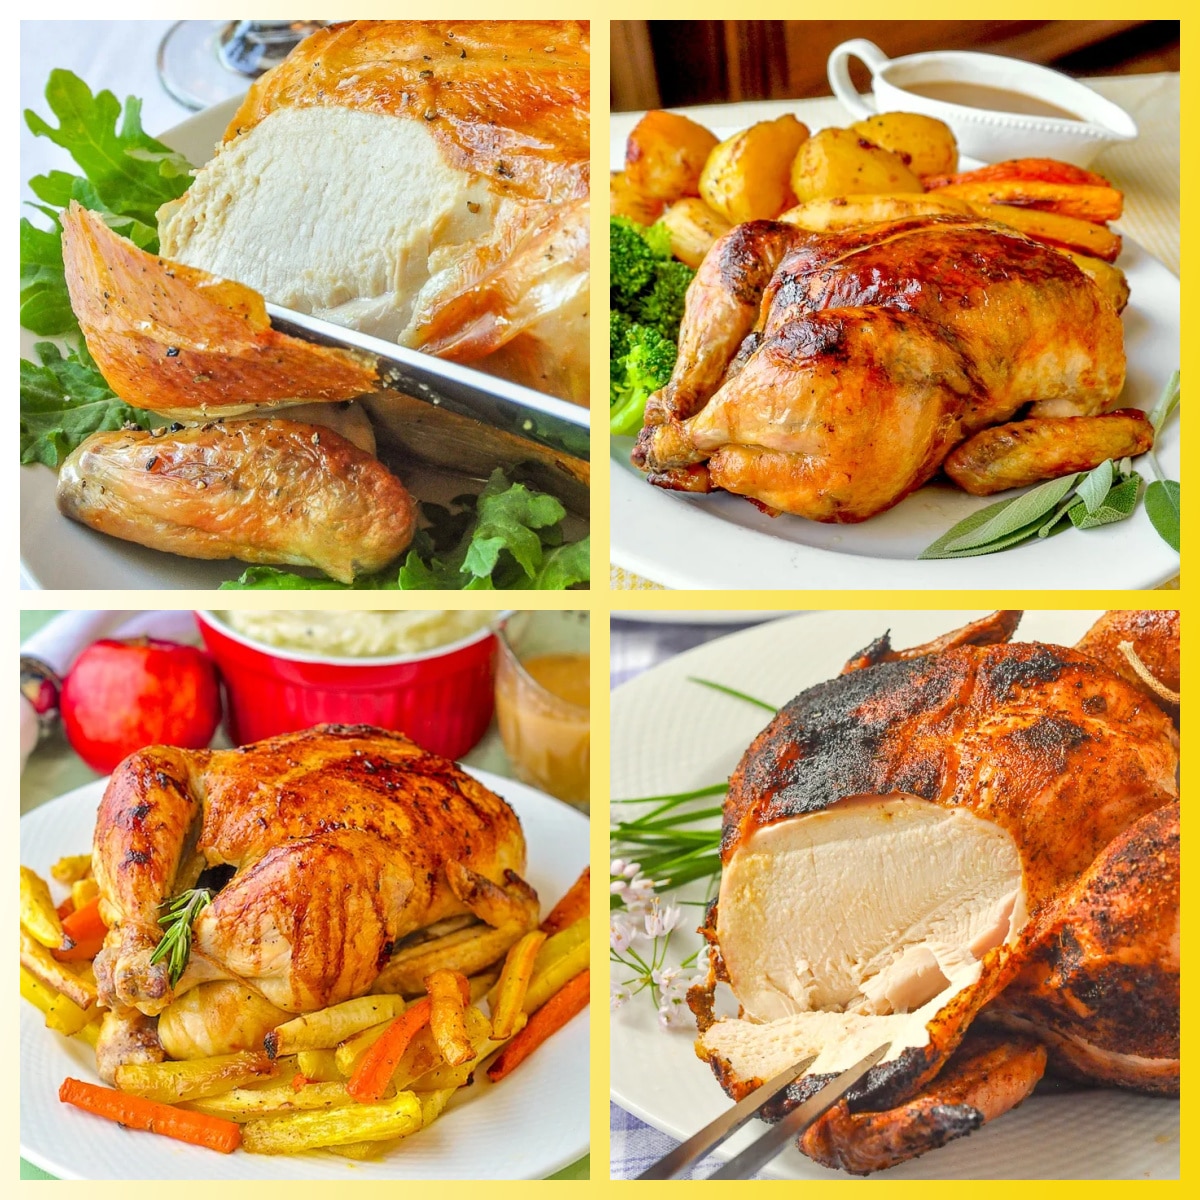 Best Whole Roasted Chicken Recipes photo collage for featured image